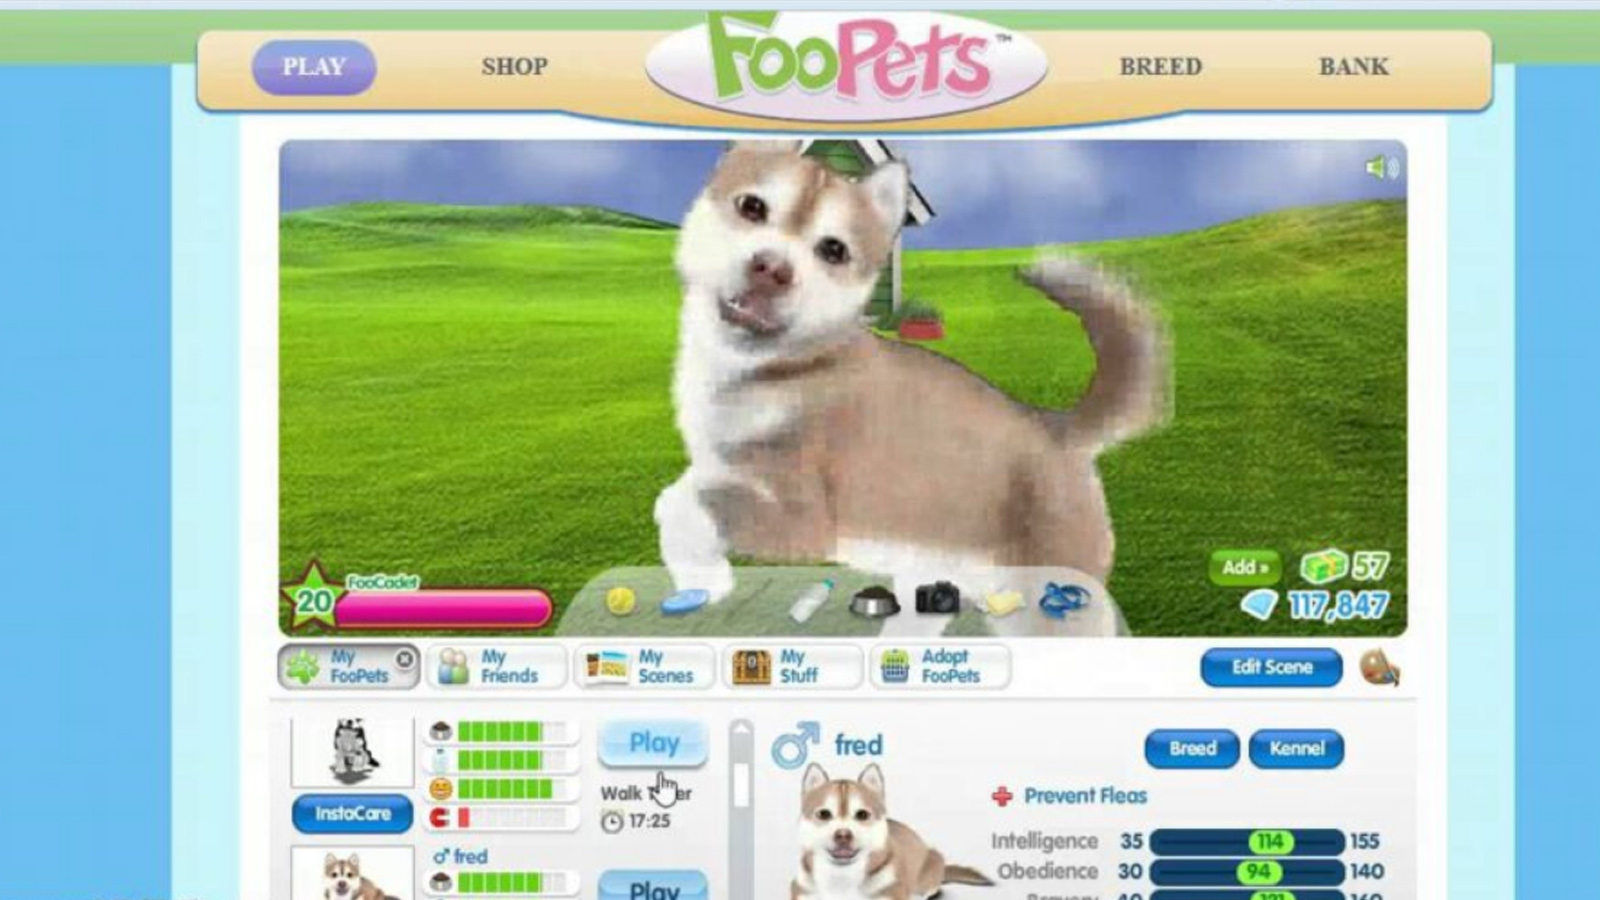 Find pricing, reviews and other details about FooPets